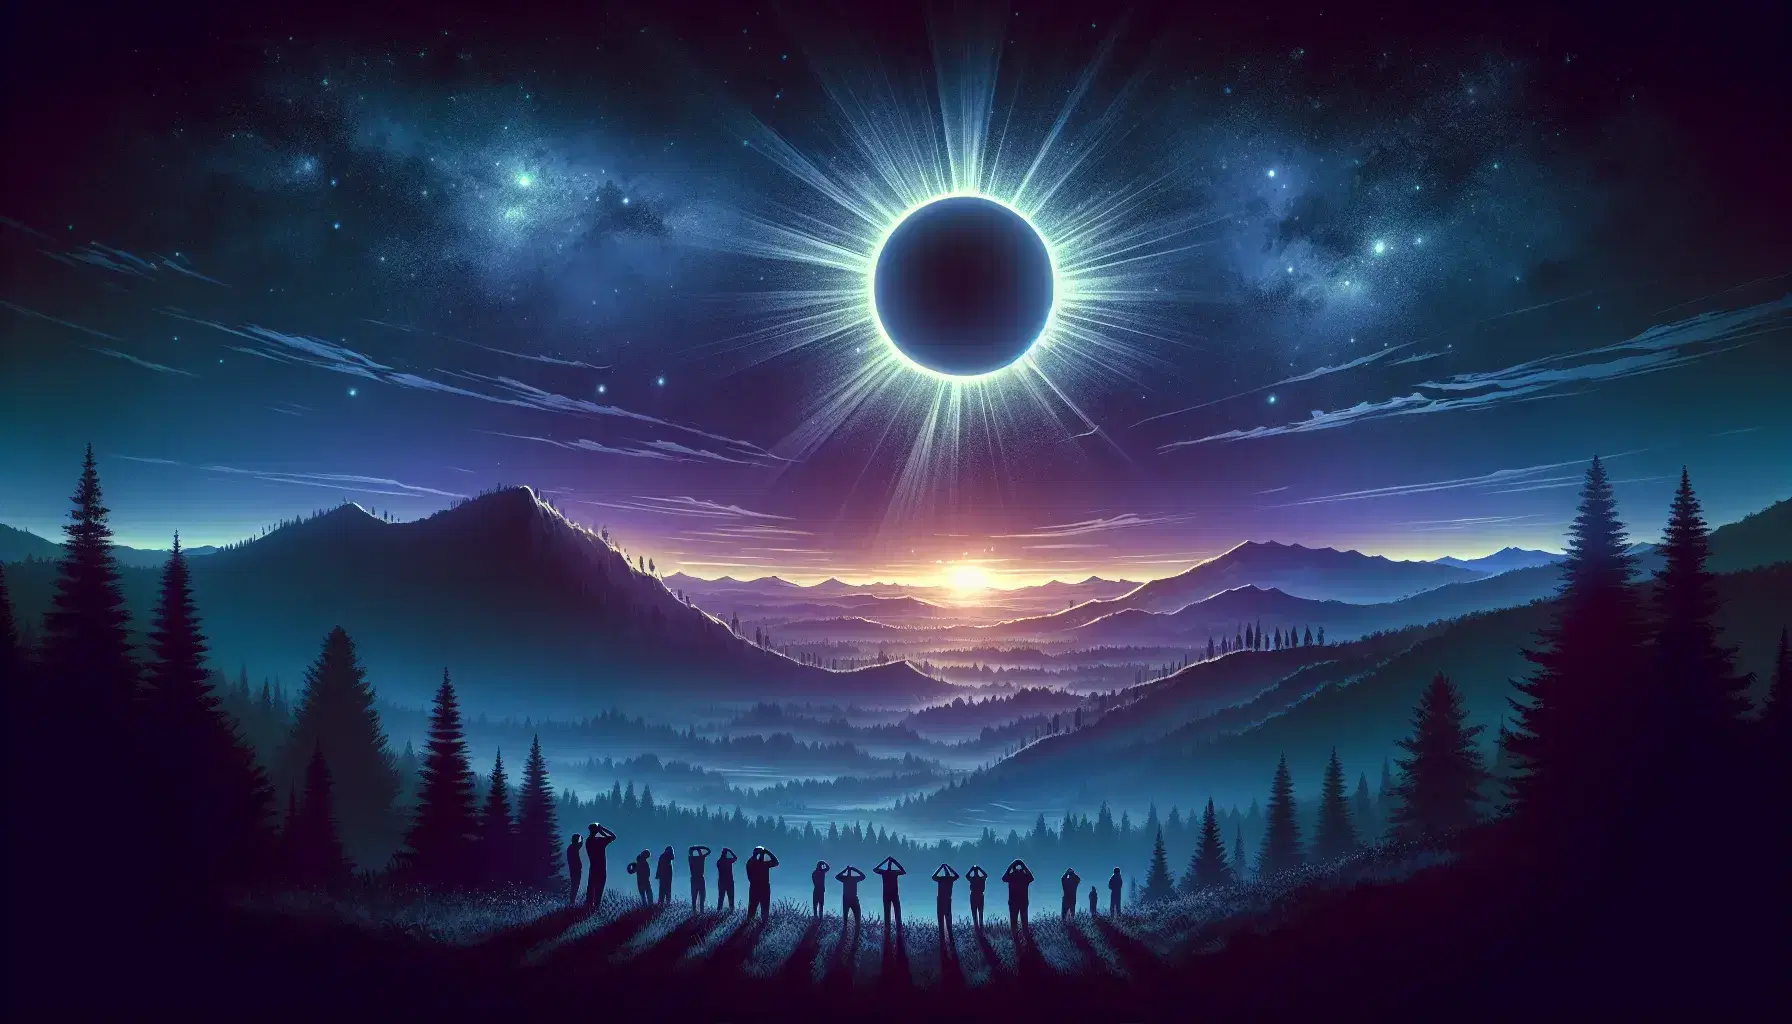 Total solar eclipse with people in silhouette on a hill observing the sky, bright solar corona visible on twilight background.